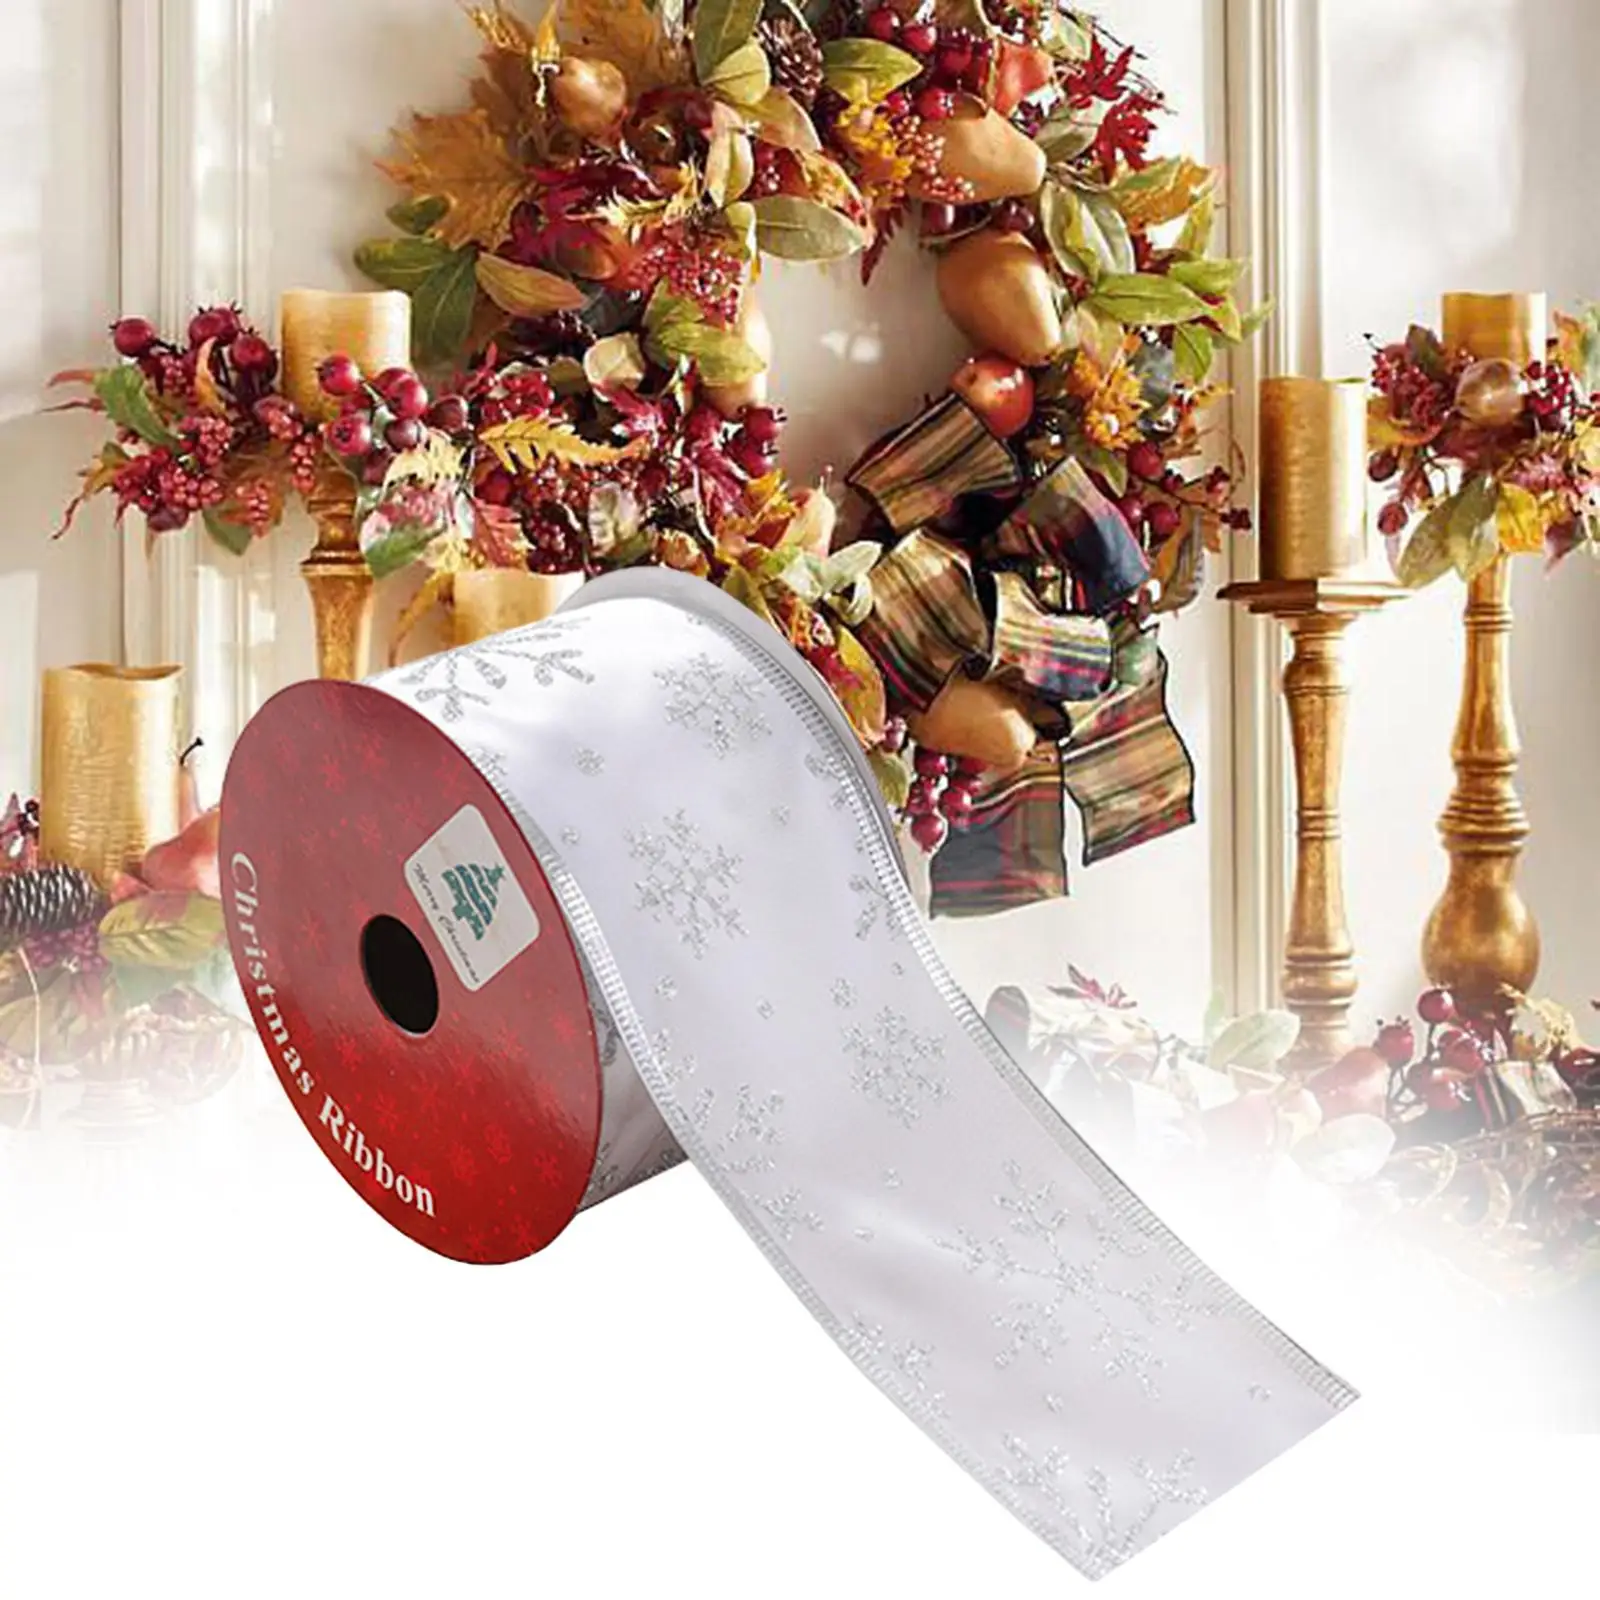 2023 Christmas Ribbon Festival Wreath 6.3cm Wide Elegant Bouquet Holiday Christmas Trees Centerpieces Gift Wrapping Ribbon Decor